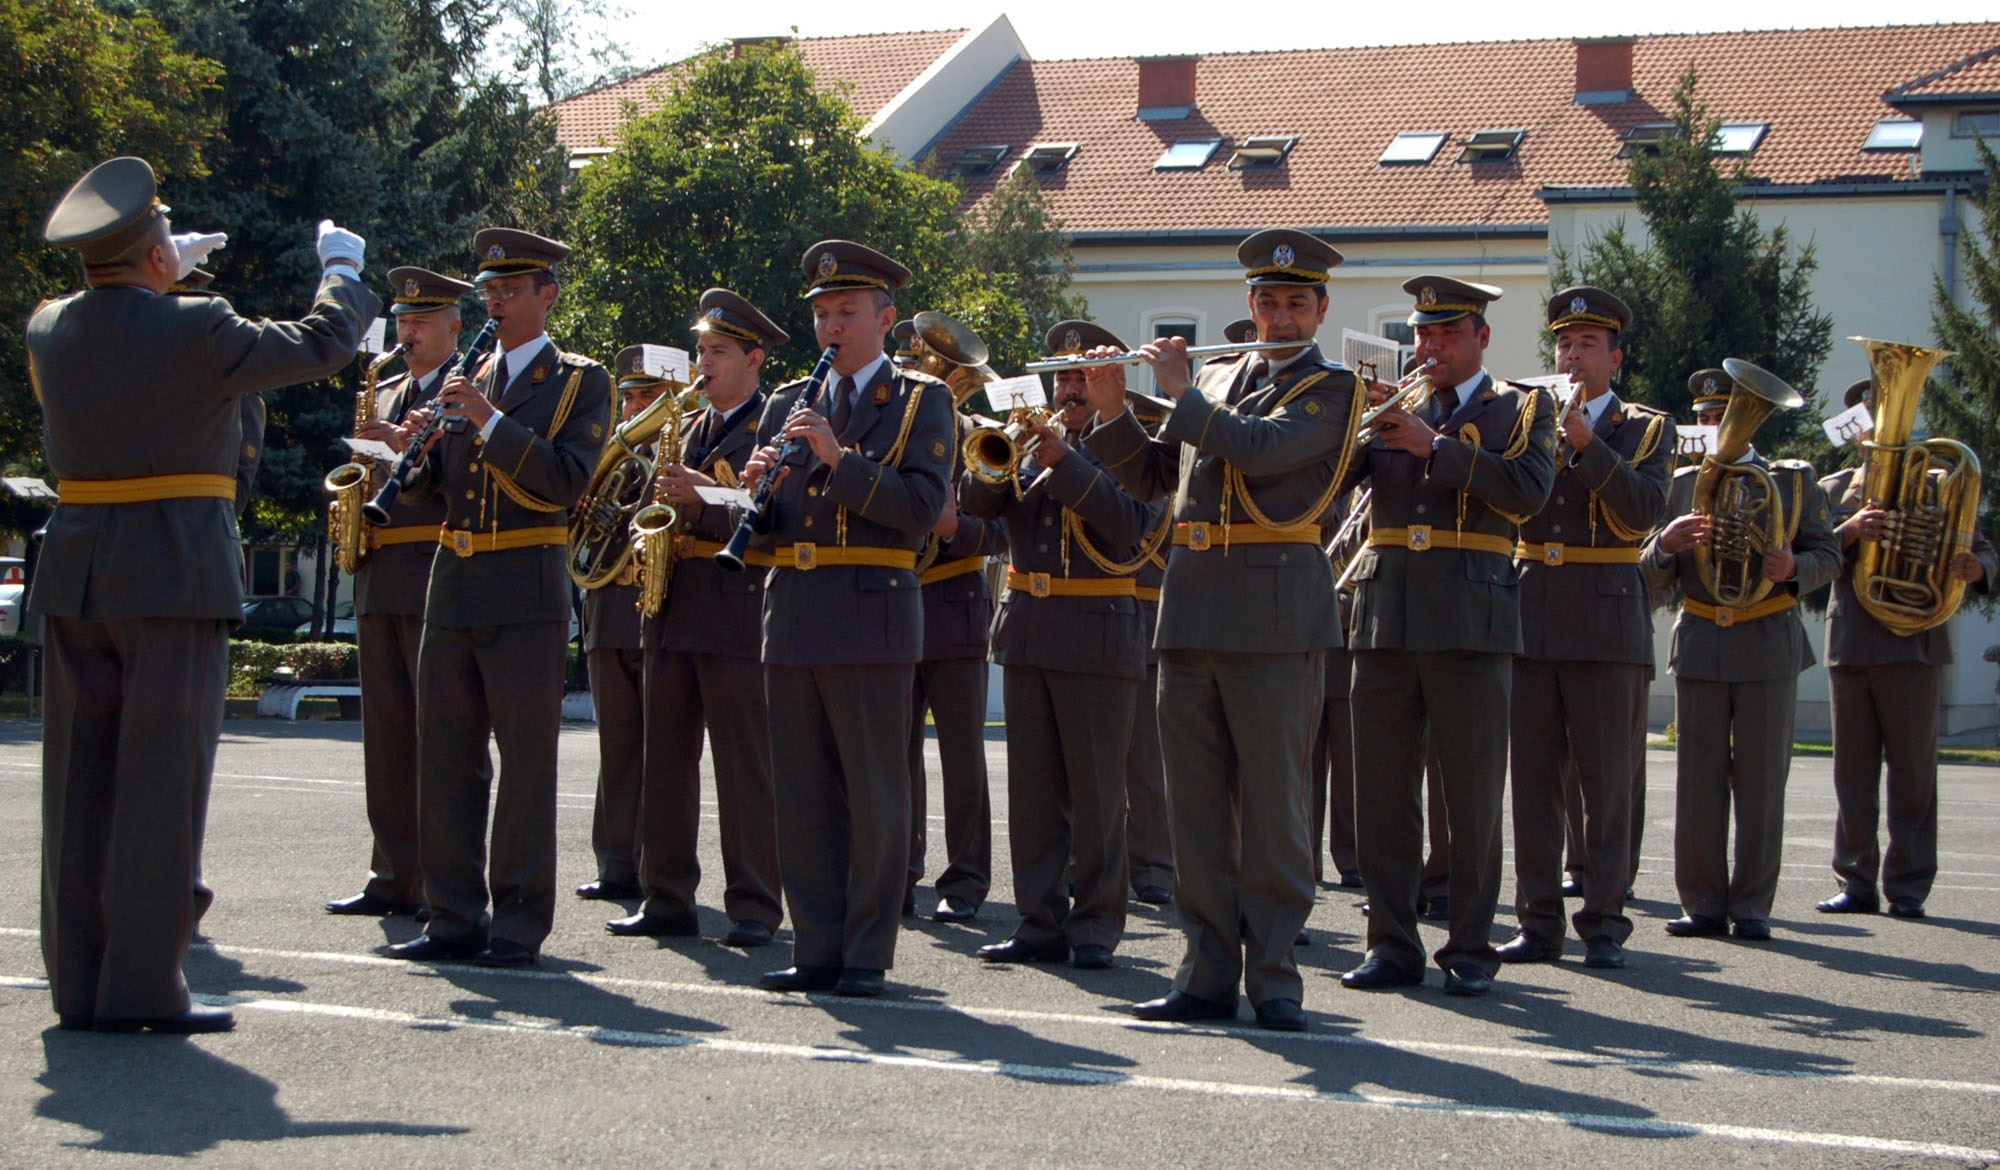 NIS, Serbia – The Serbian military orchestra performs at the military medical training exercise in Central and Eastern Europe, or MEDCEUR 2009, opening ceremony Sept. 2 at the Knjaz Mihailo Barracks here. The exercise, scheduled for Sept. 2-13, is hosting 15 nations to provide joint training and assist other organization in enhancing disaster response actions. (U.S. Air Force photo/Senior Airman Kali L. Gradishar)